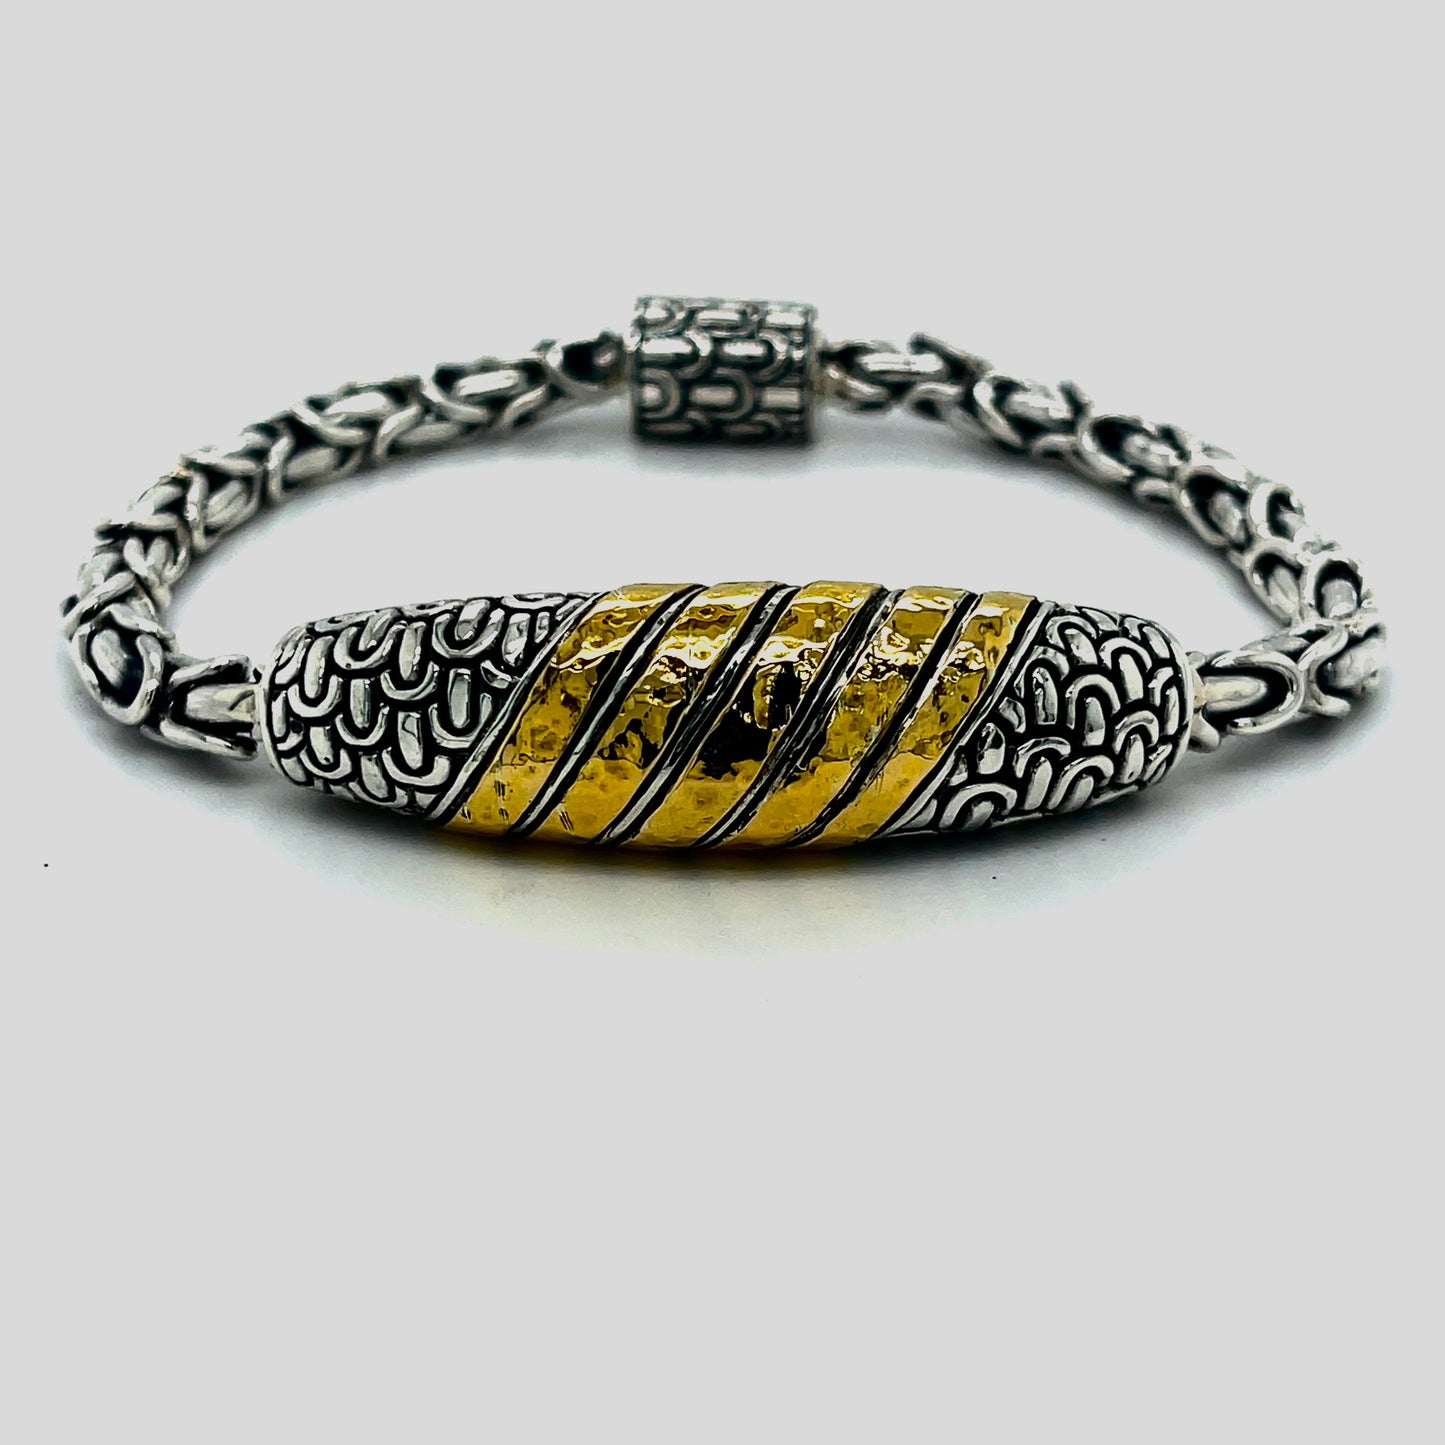 Silver bracelet with 18kt Gold accent